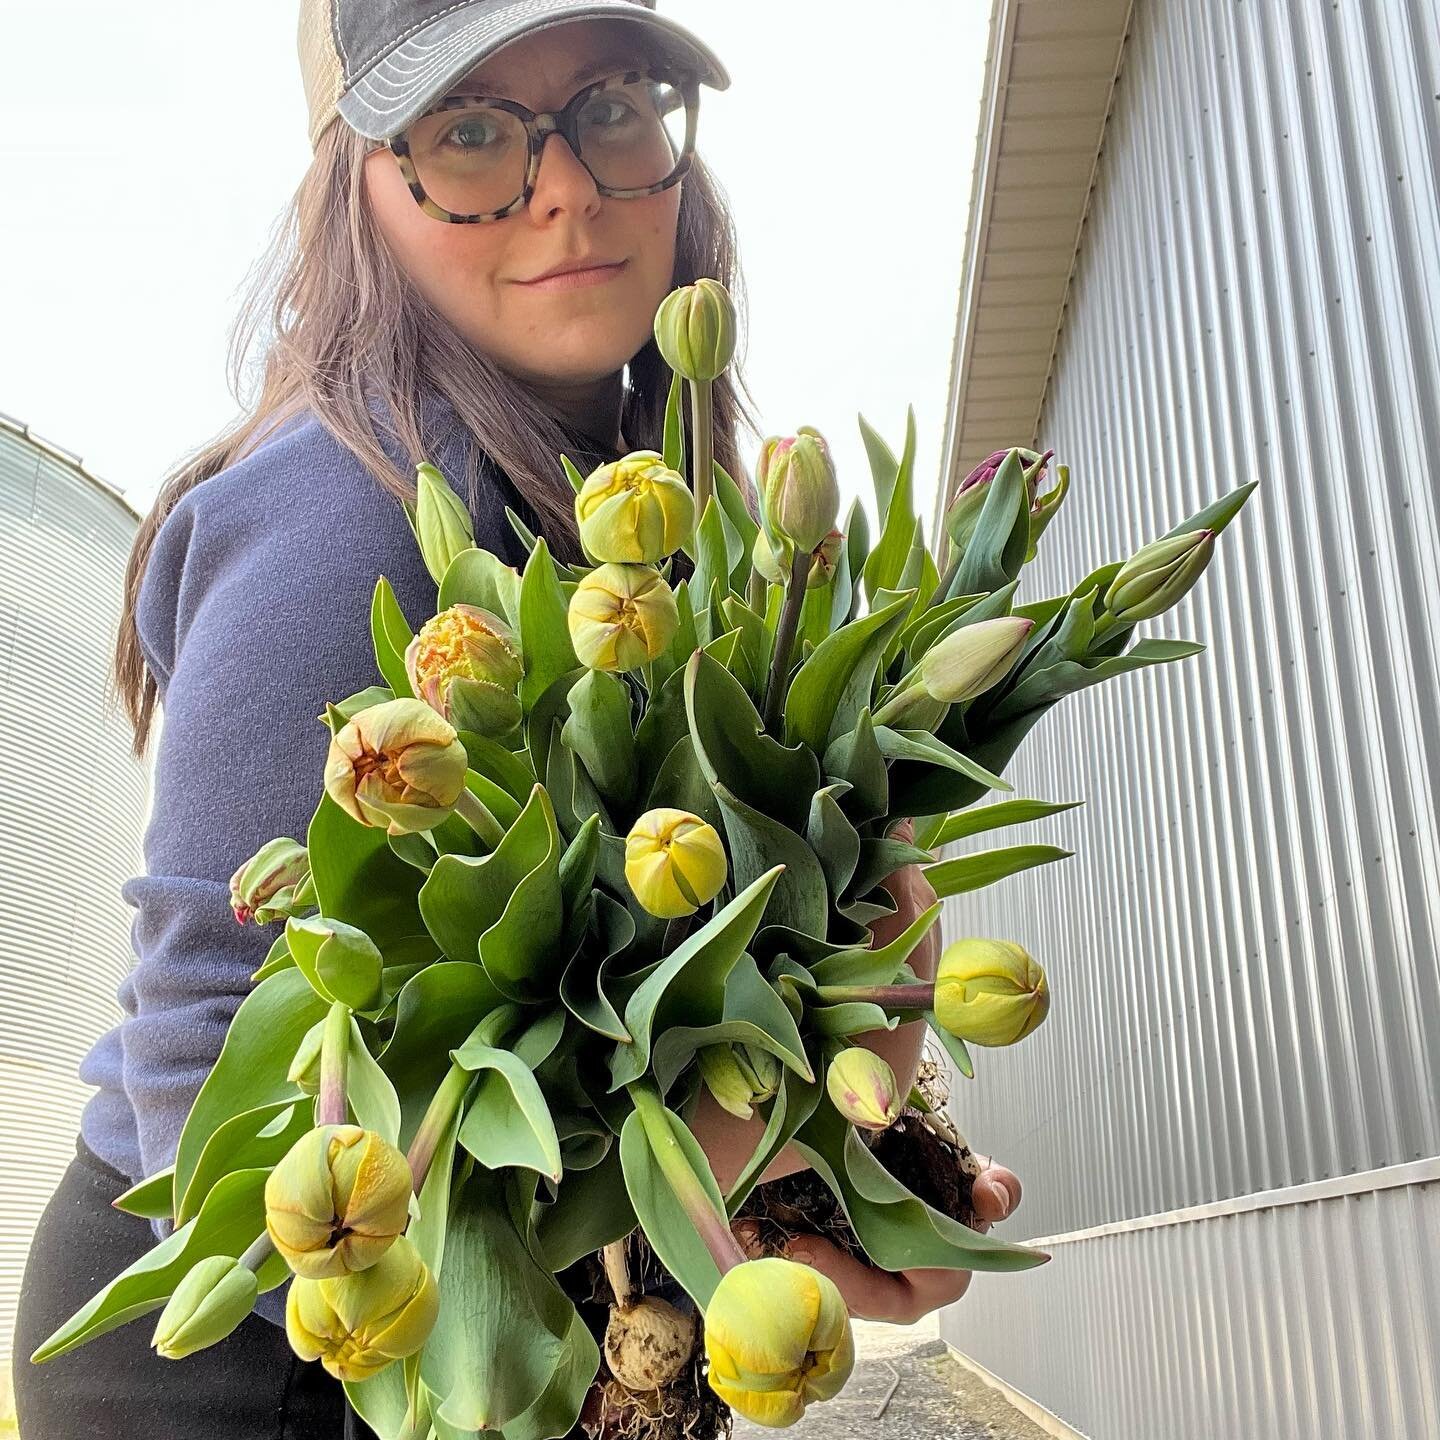 We will have loads of flowers for you this weekend! 🌷 

I am fortunate to be harvesting armfuls of tulips right now, just in time for Mother&rsquo;s Day. Last year I didn&rsquo;t have a single sellable stem for the holiday, and it&rsquo;s a good rem